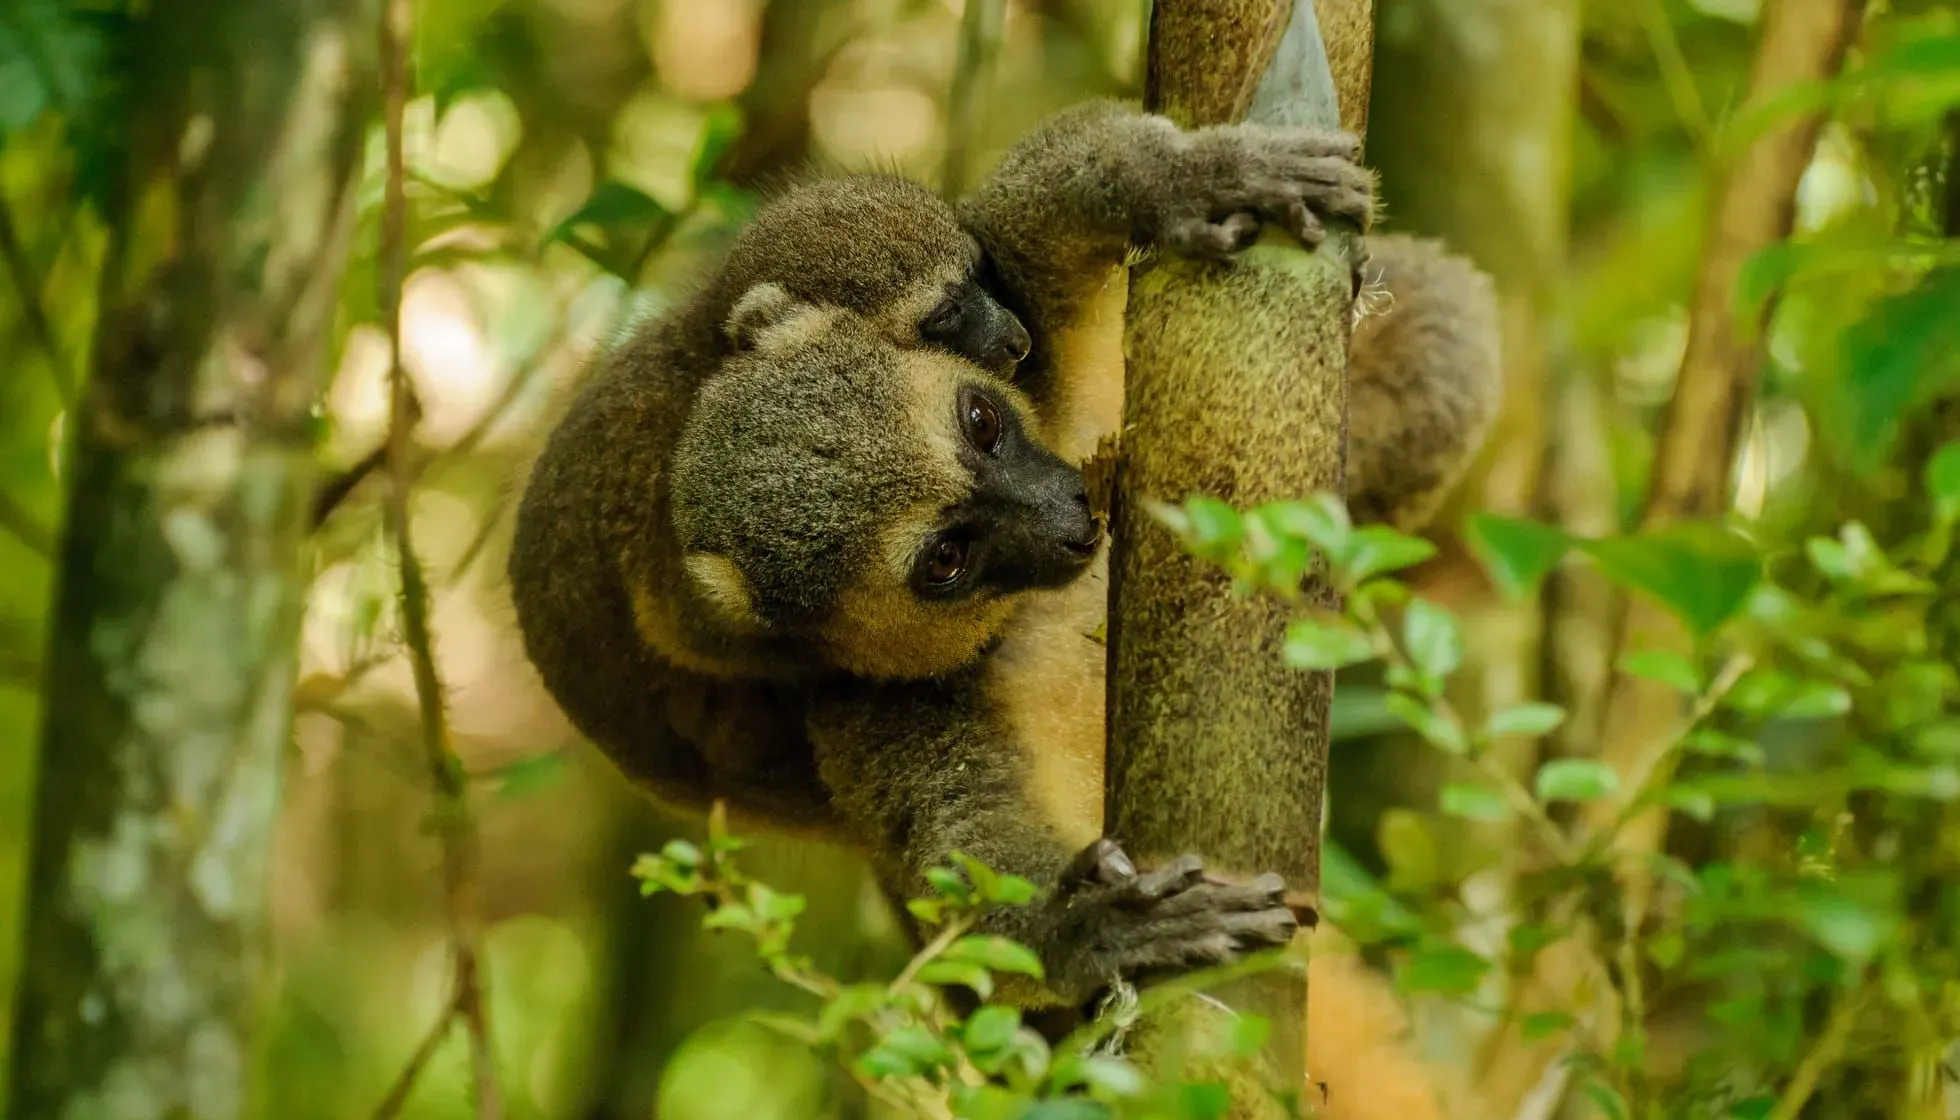 Golden Bamboo Lemur with its baby